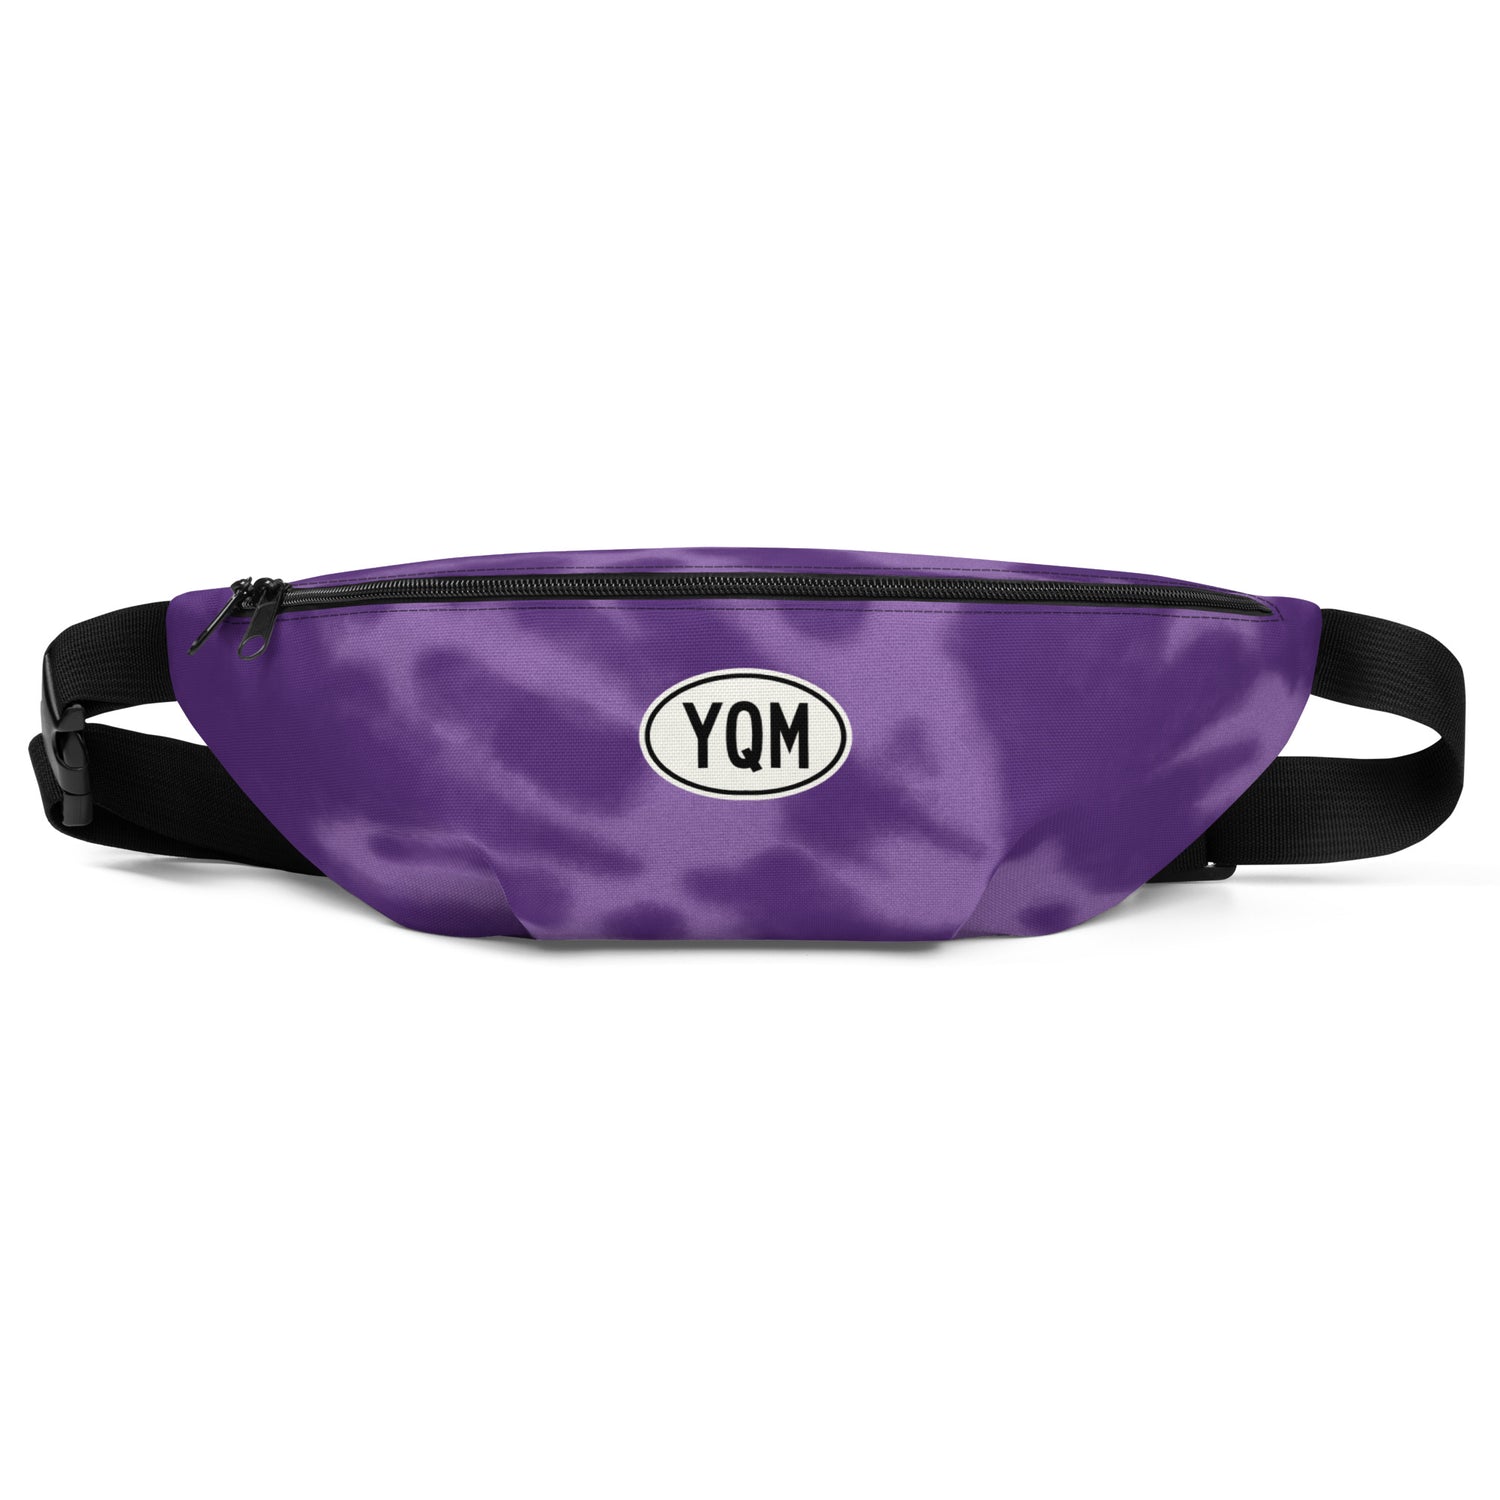 Moncton New Brunswick Backpacks, Fanny Packs and Tote Bags • YQM Airport Code